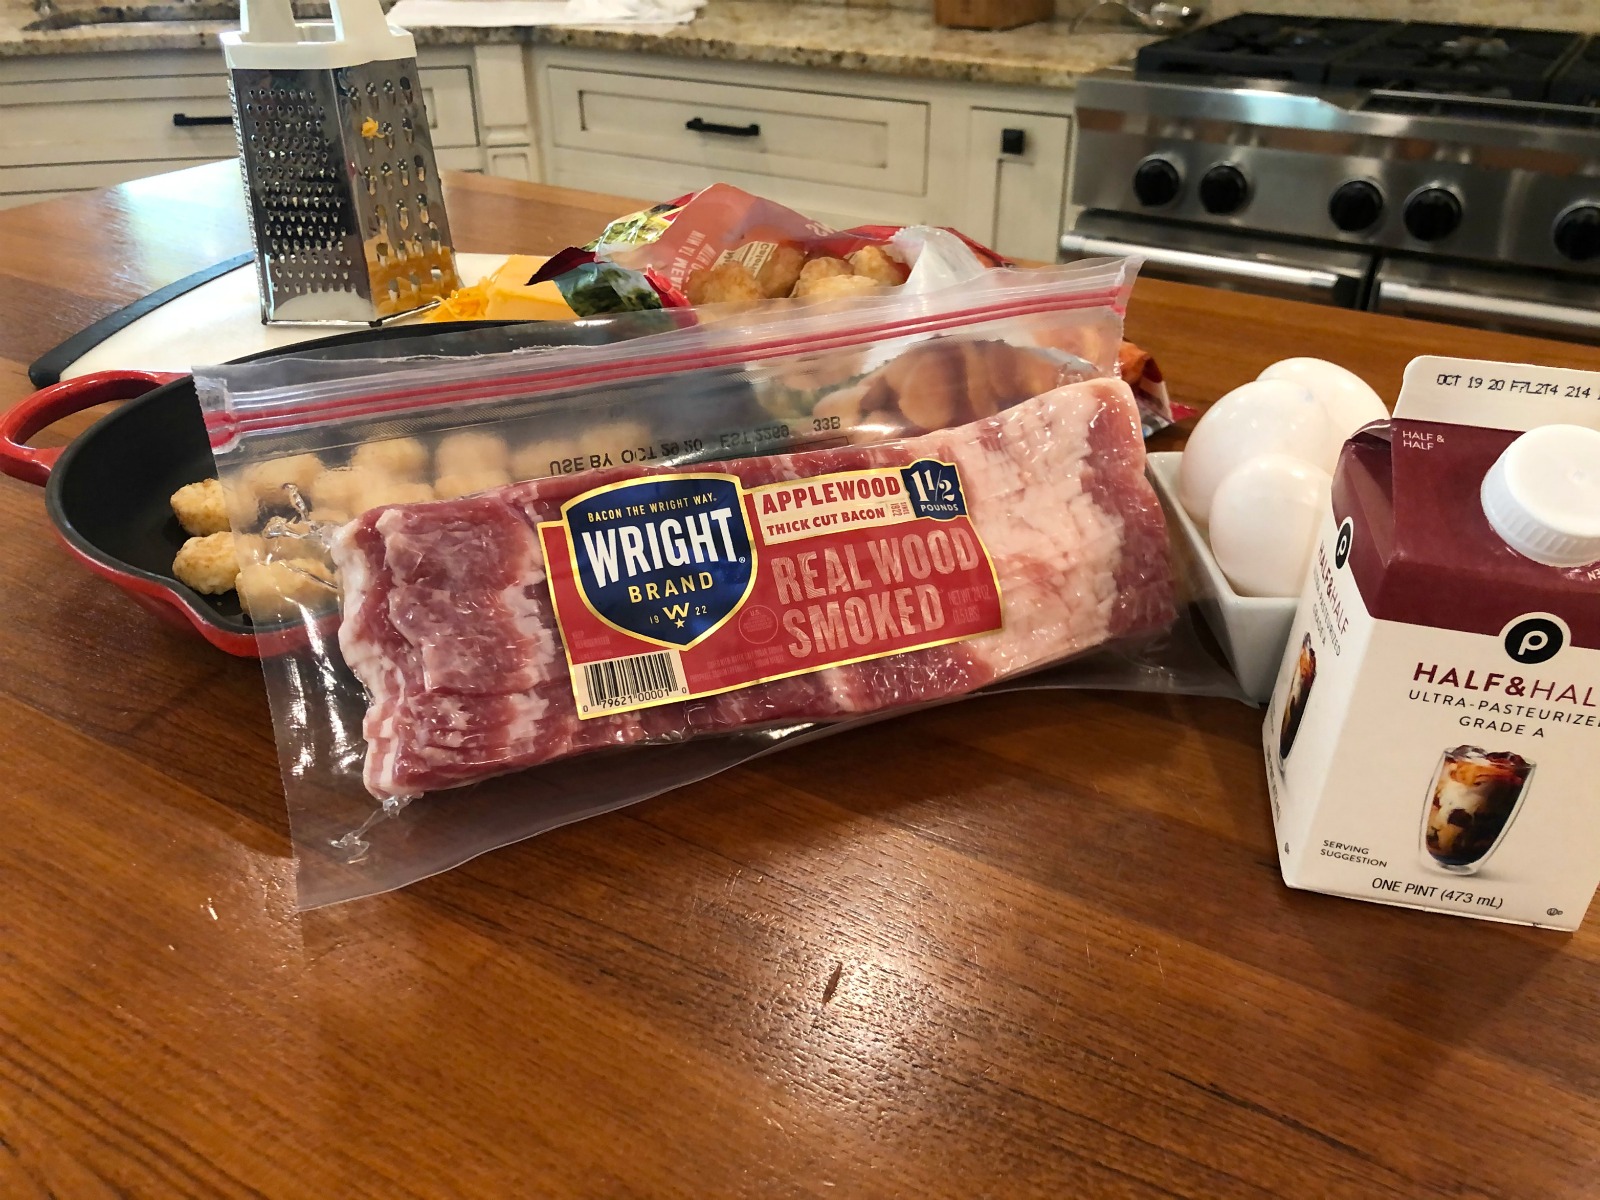 Start Your Day Off Great With Delicious Products From Jimmy Dean & Wright Brand - Find Your Favorites At Publix on I Heart Publix 1